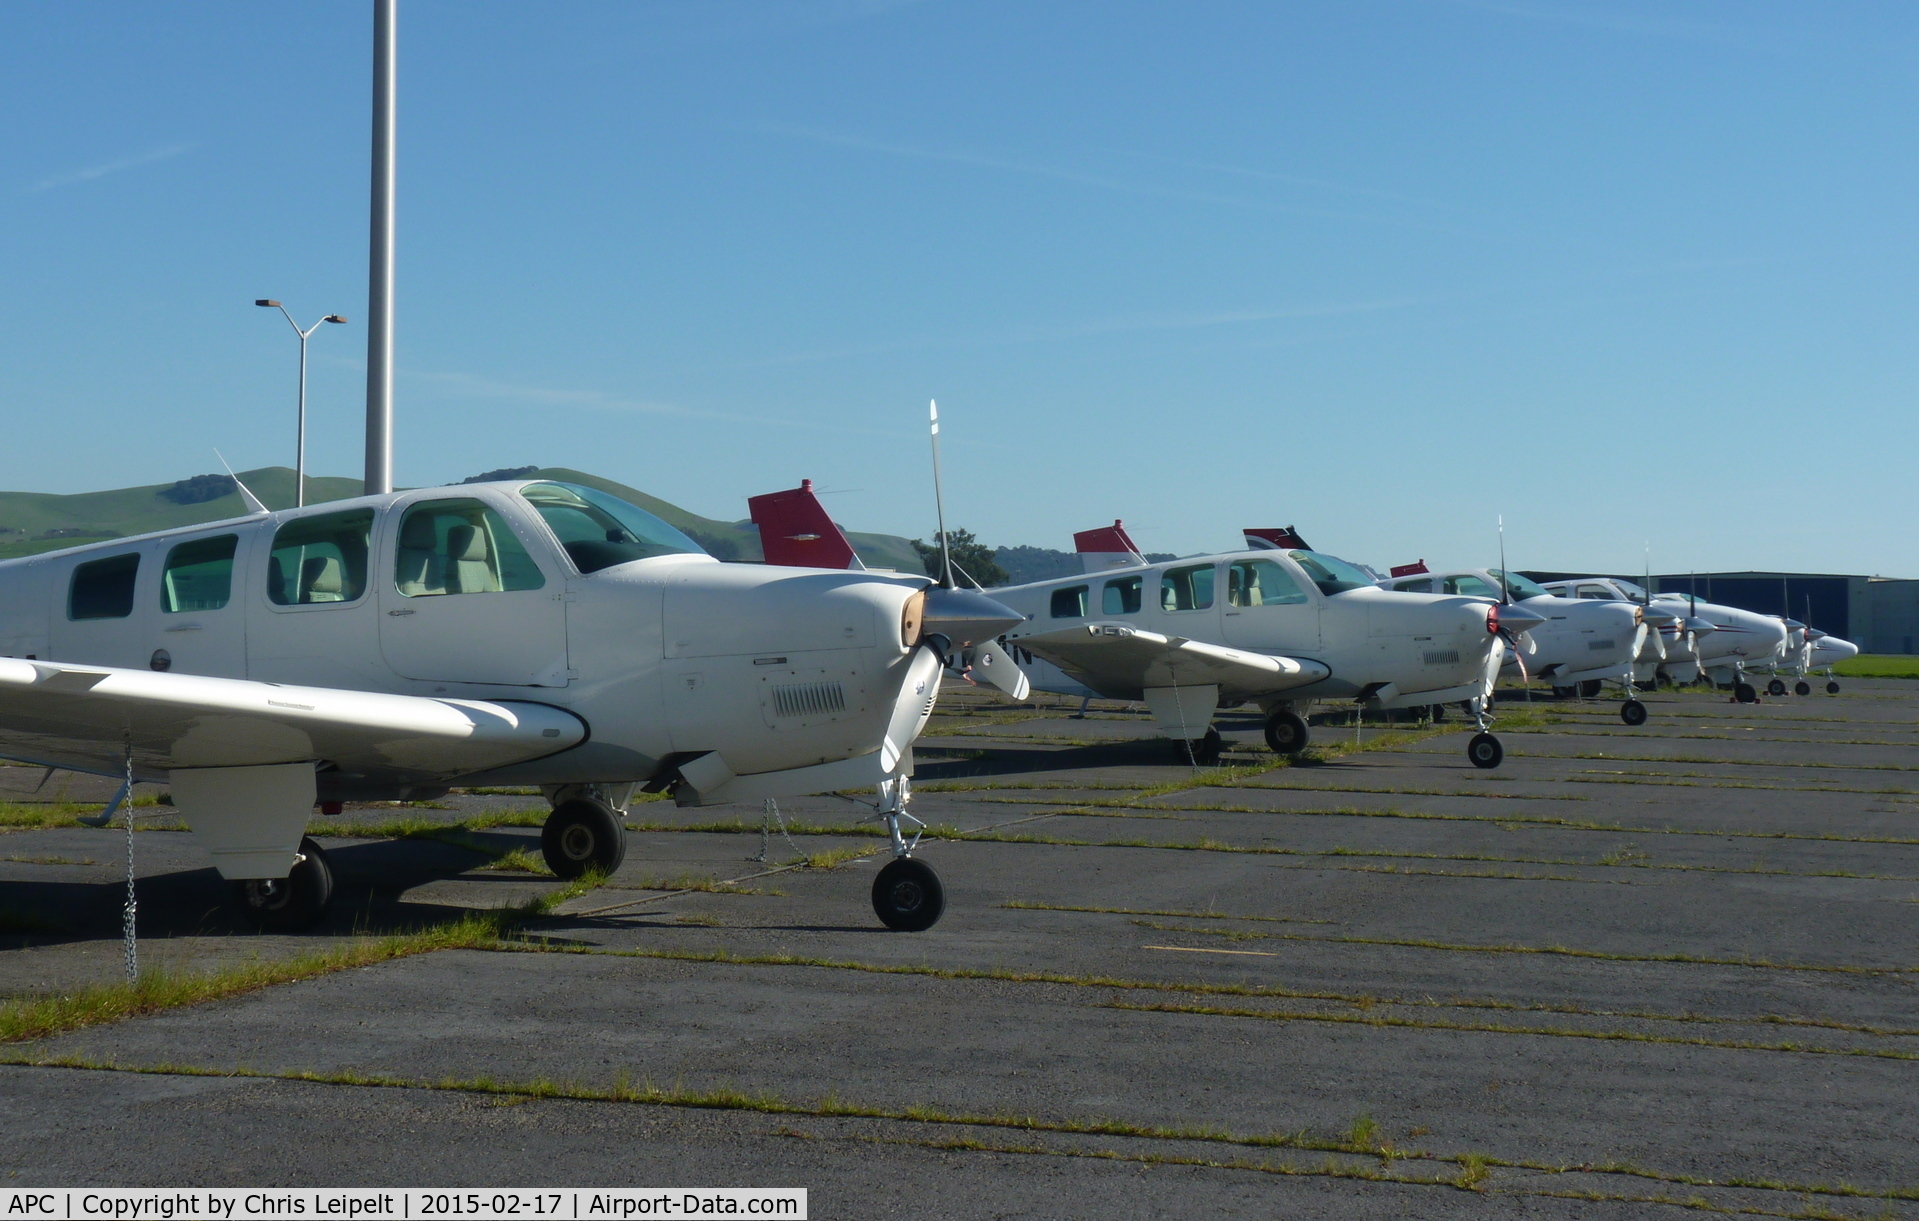 Napa County Airport (APC) - A long row of Beechcraft Bonanza 36's, each of them painted in the JAL livery.